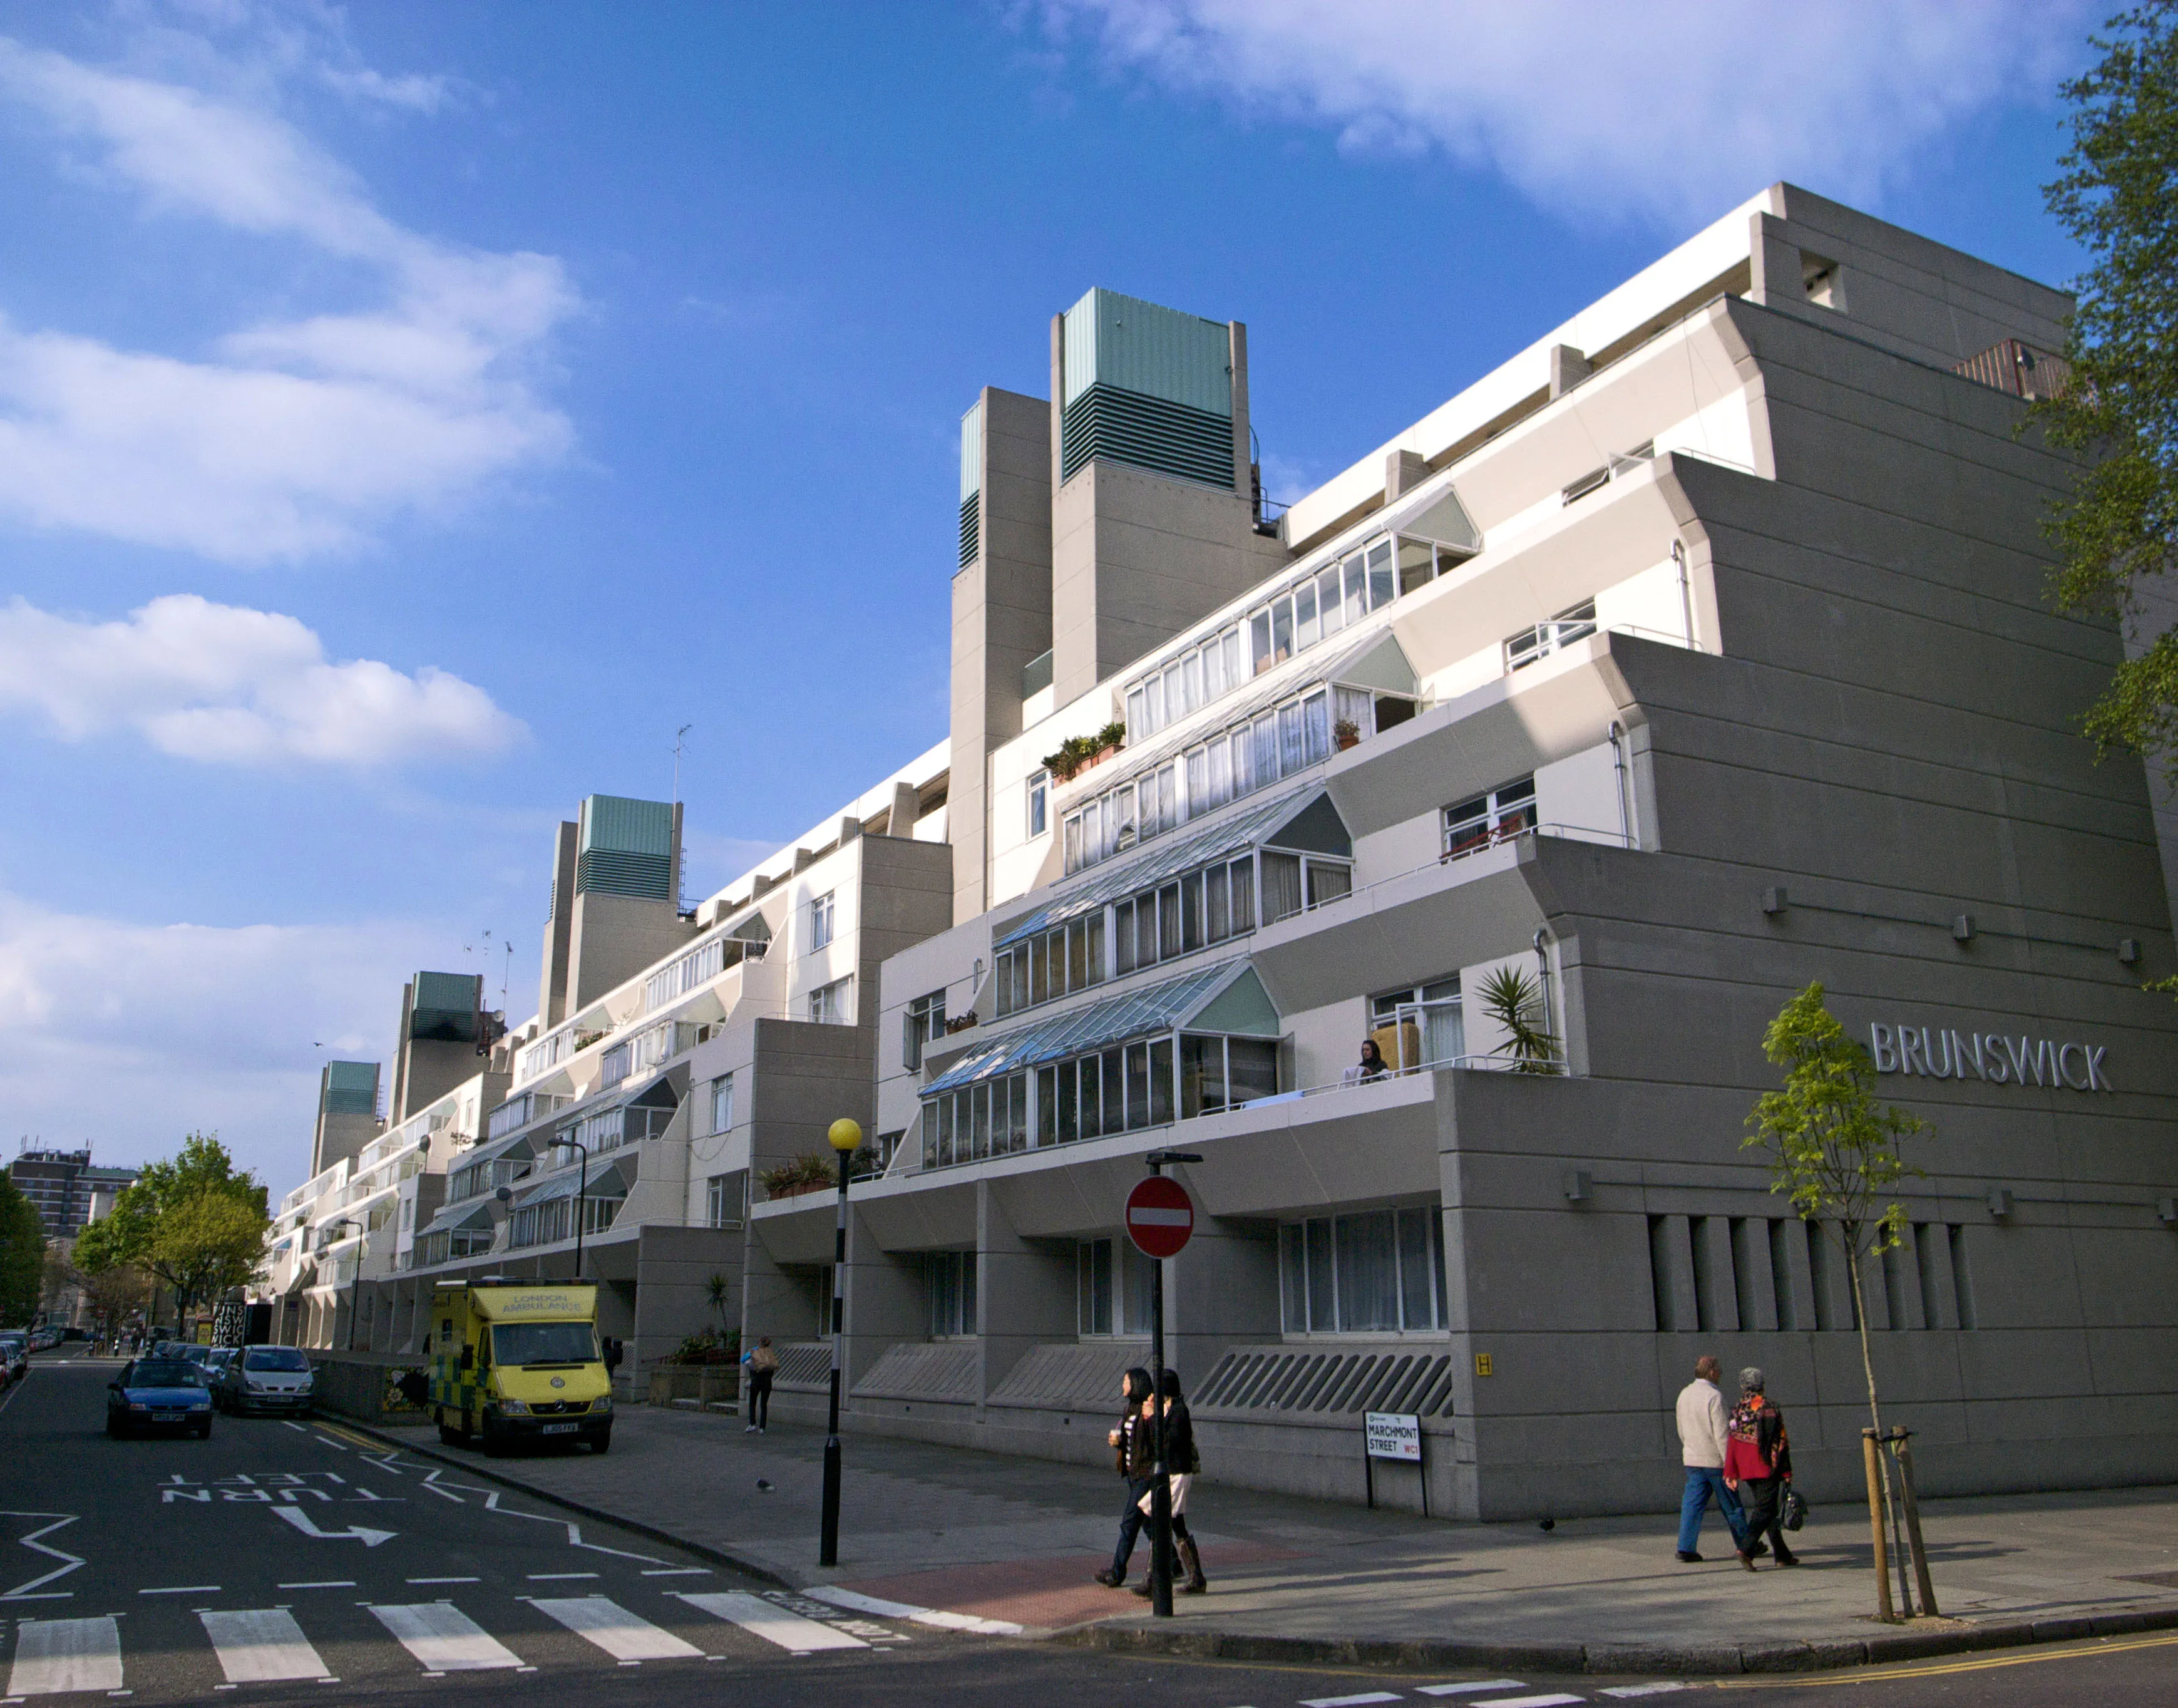 The Brunswick Centre in United Kingdom, europe | Sporting Equipment,Handbags,Shoes,Accessories,Clothes,Natural Beauty Products,Cosmetics,Sportswear,Travel Bags - Country Helper